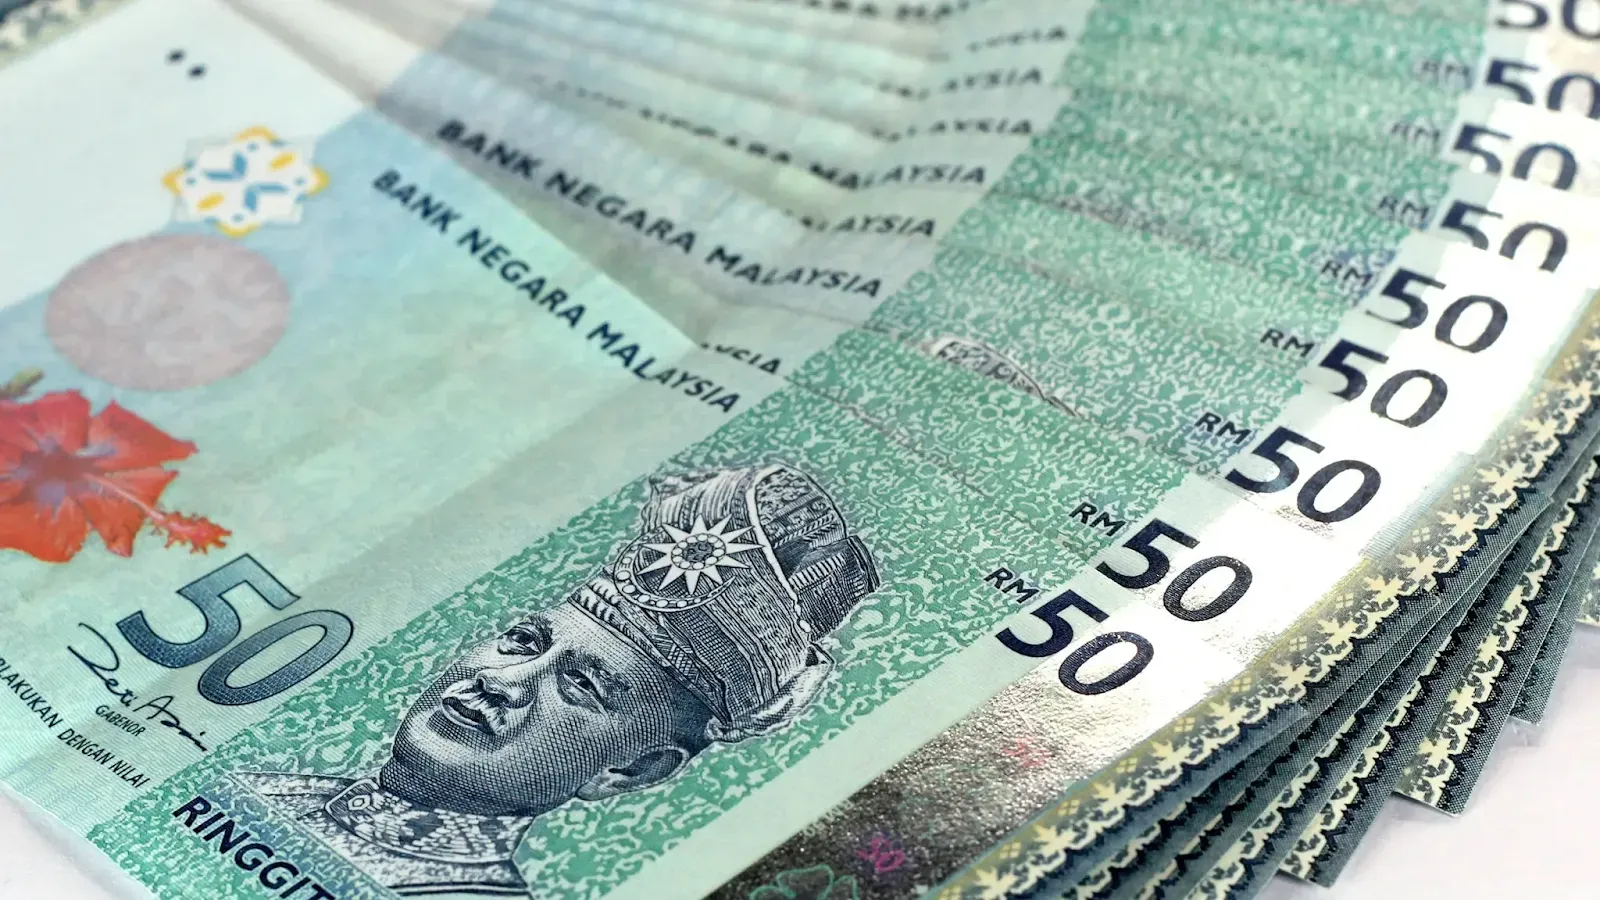 At the closing, the ringgit continues decline on the dollar.